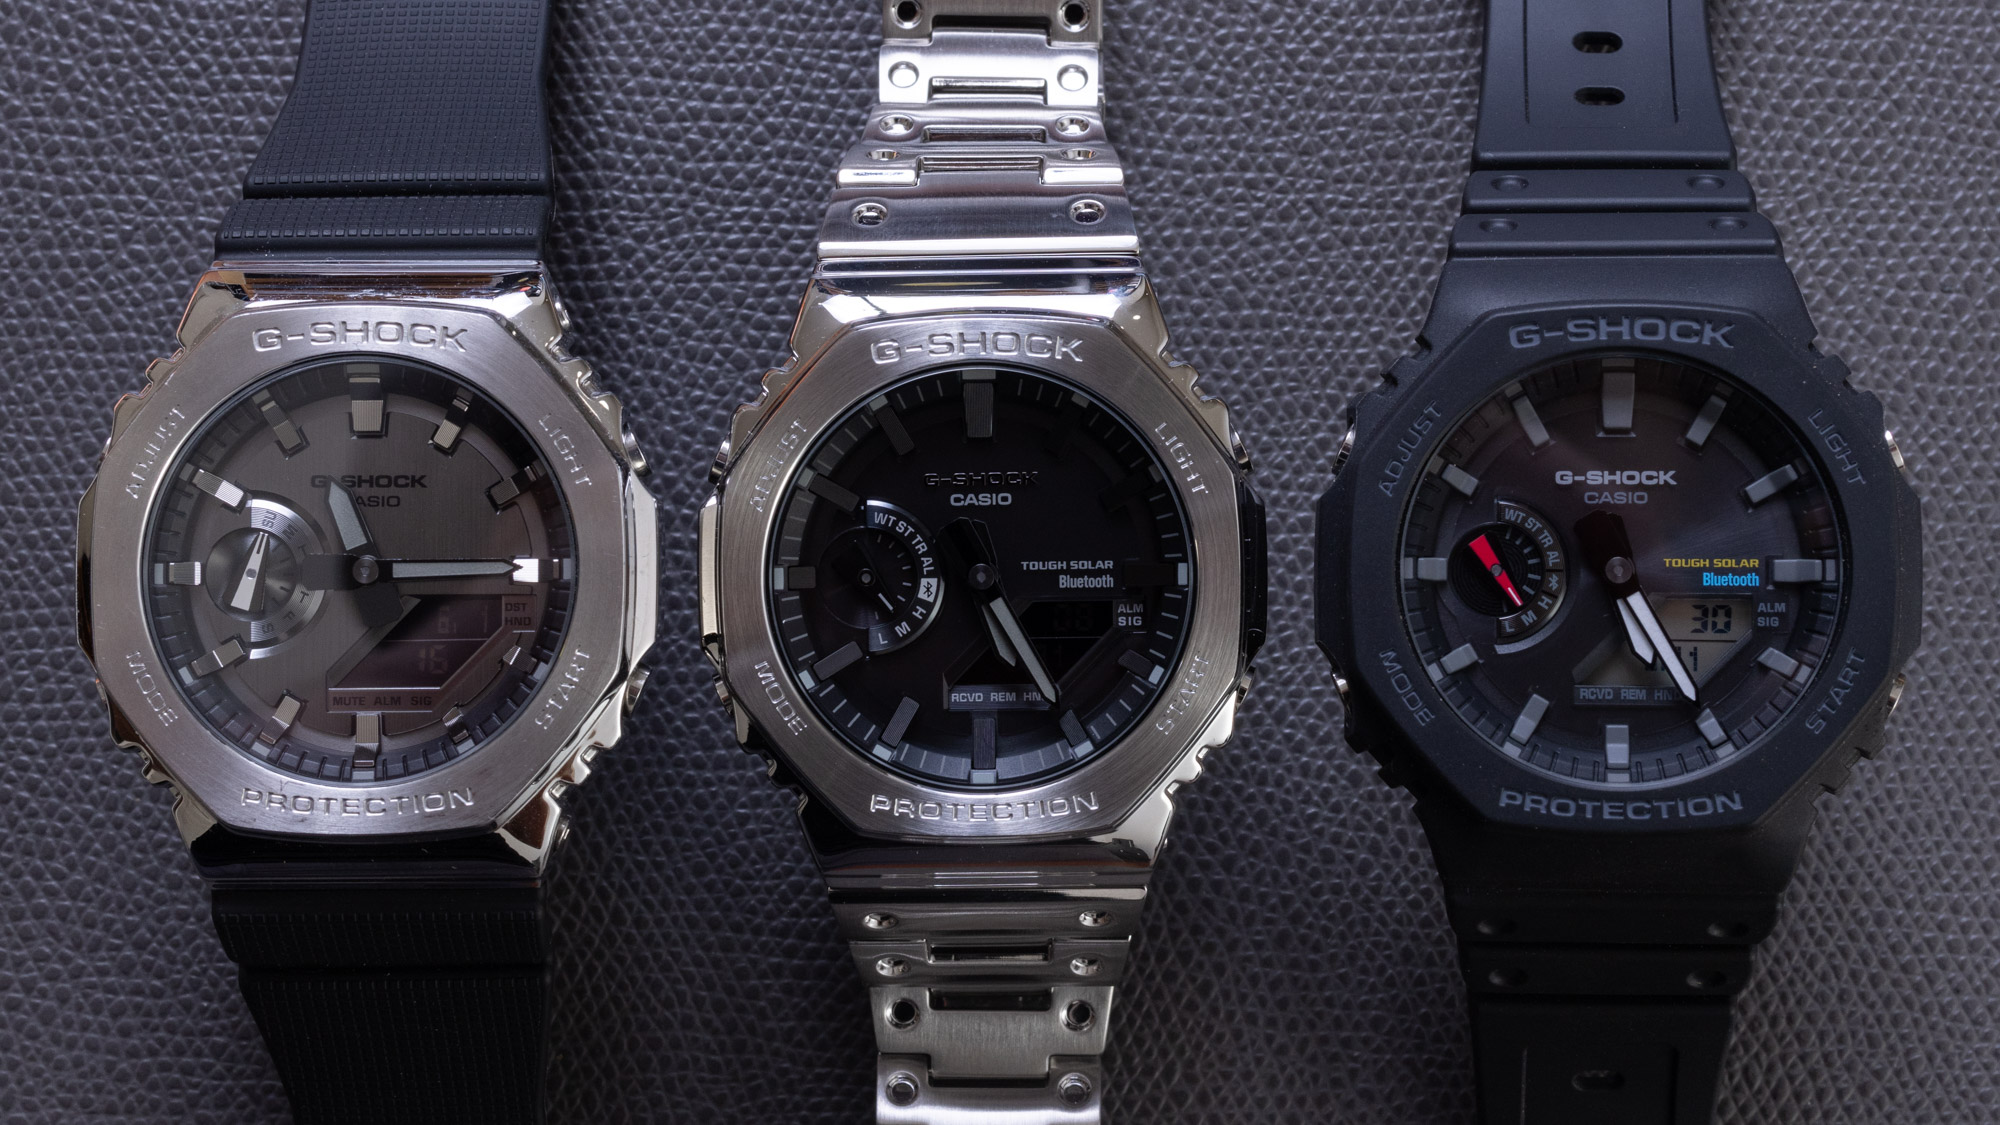 Casio to Release Full-Metal G-SHOCK Watches with Octagonal Bezel